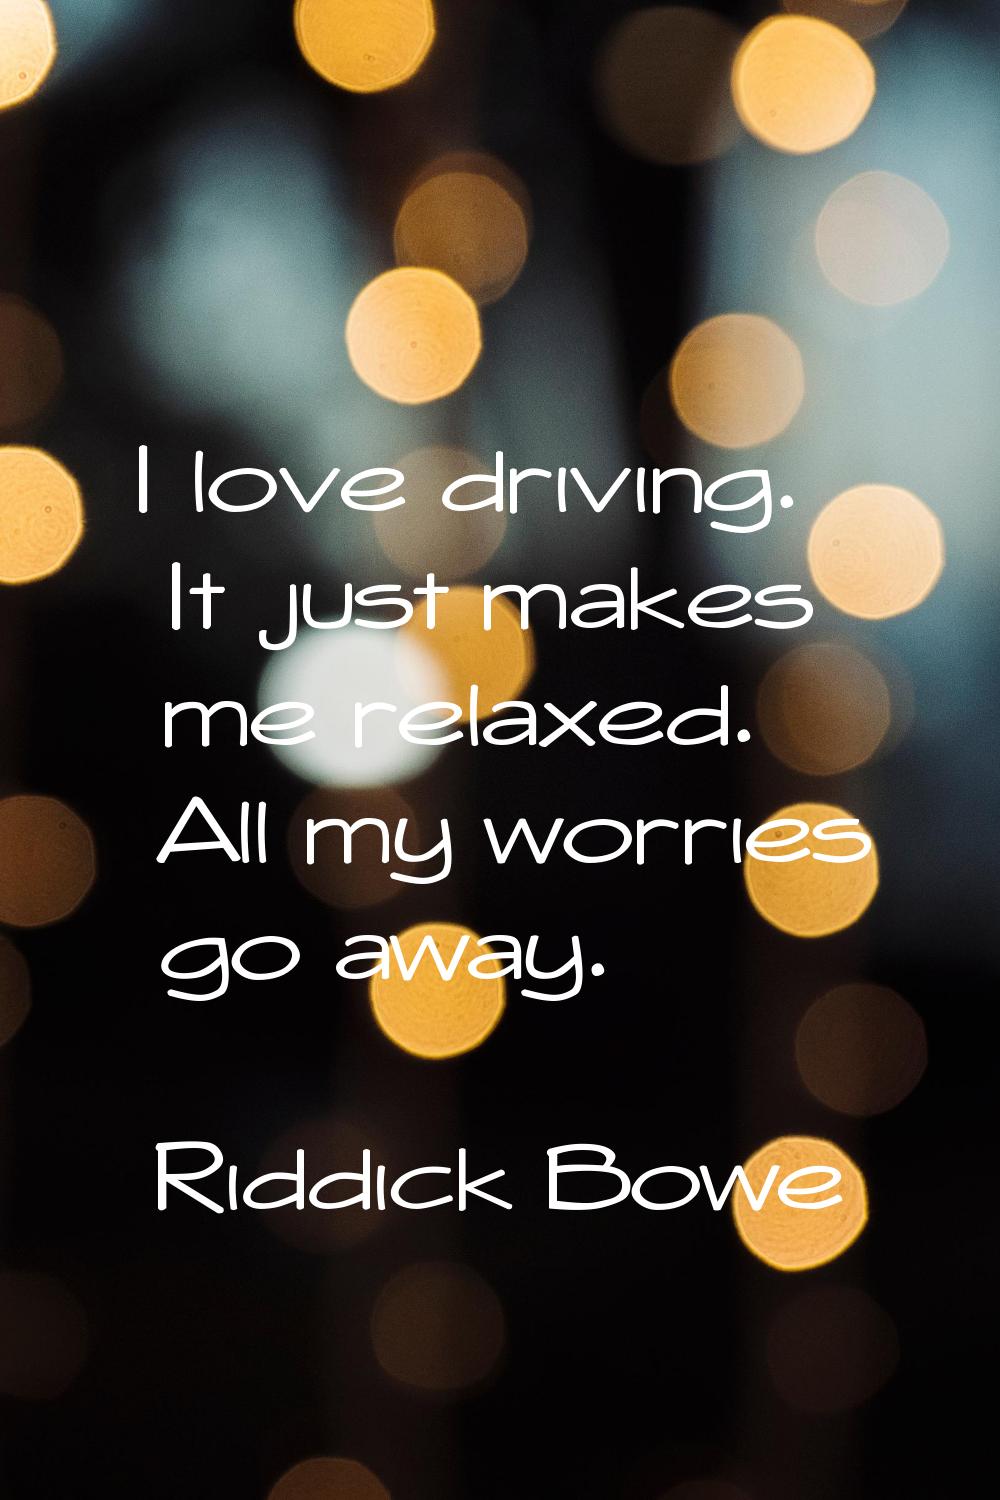 I love driving. It just makes me relaxed. All my worries go away.